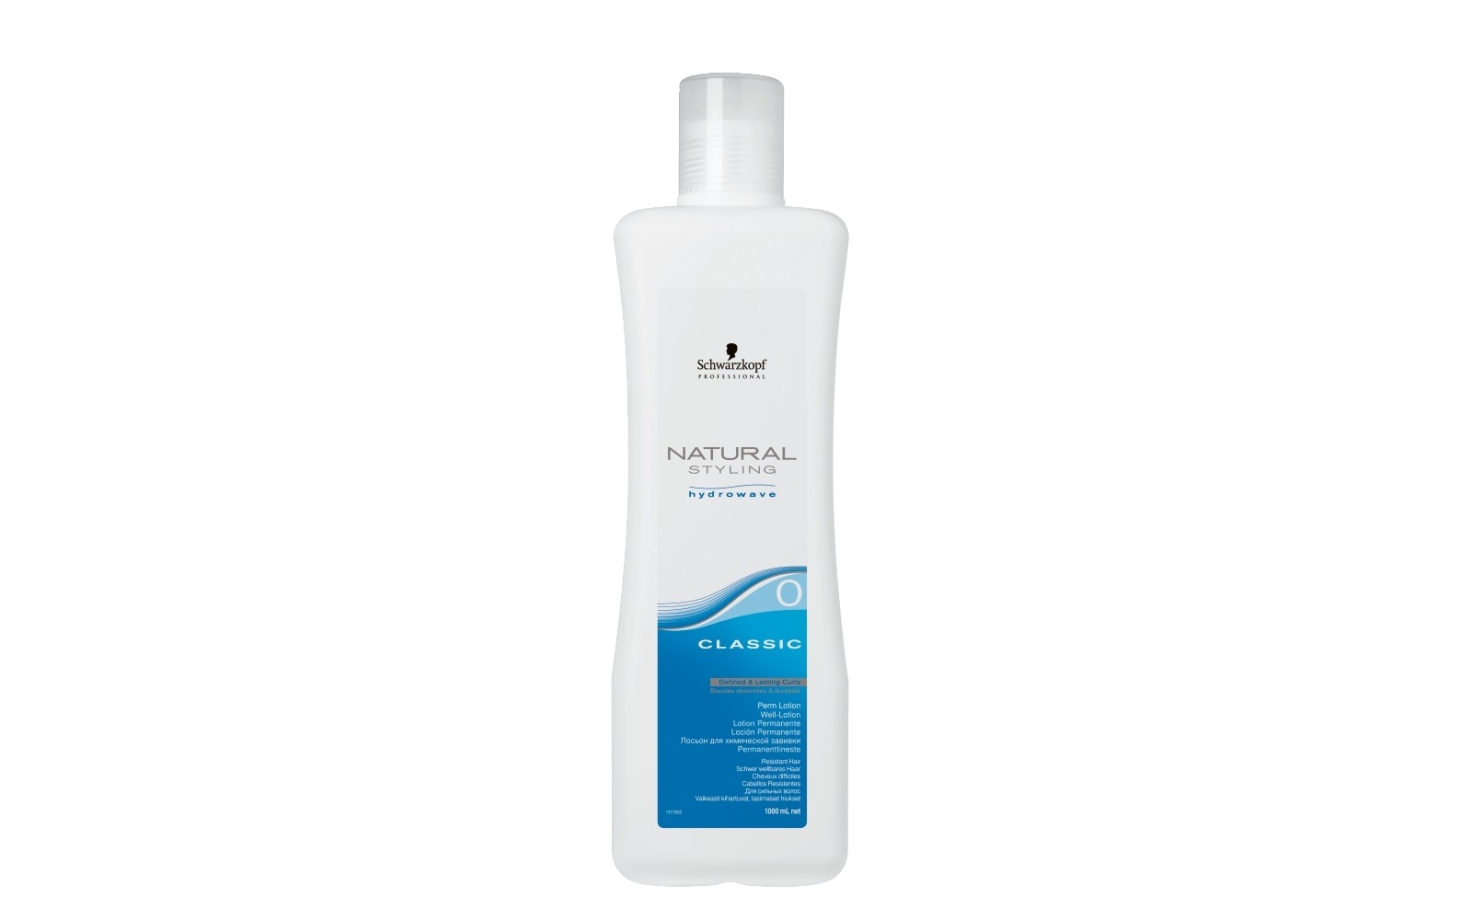 Schwarzkopf Natural Styling Classic Well-Lotion 1 Liter